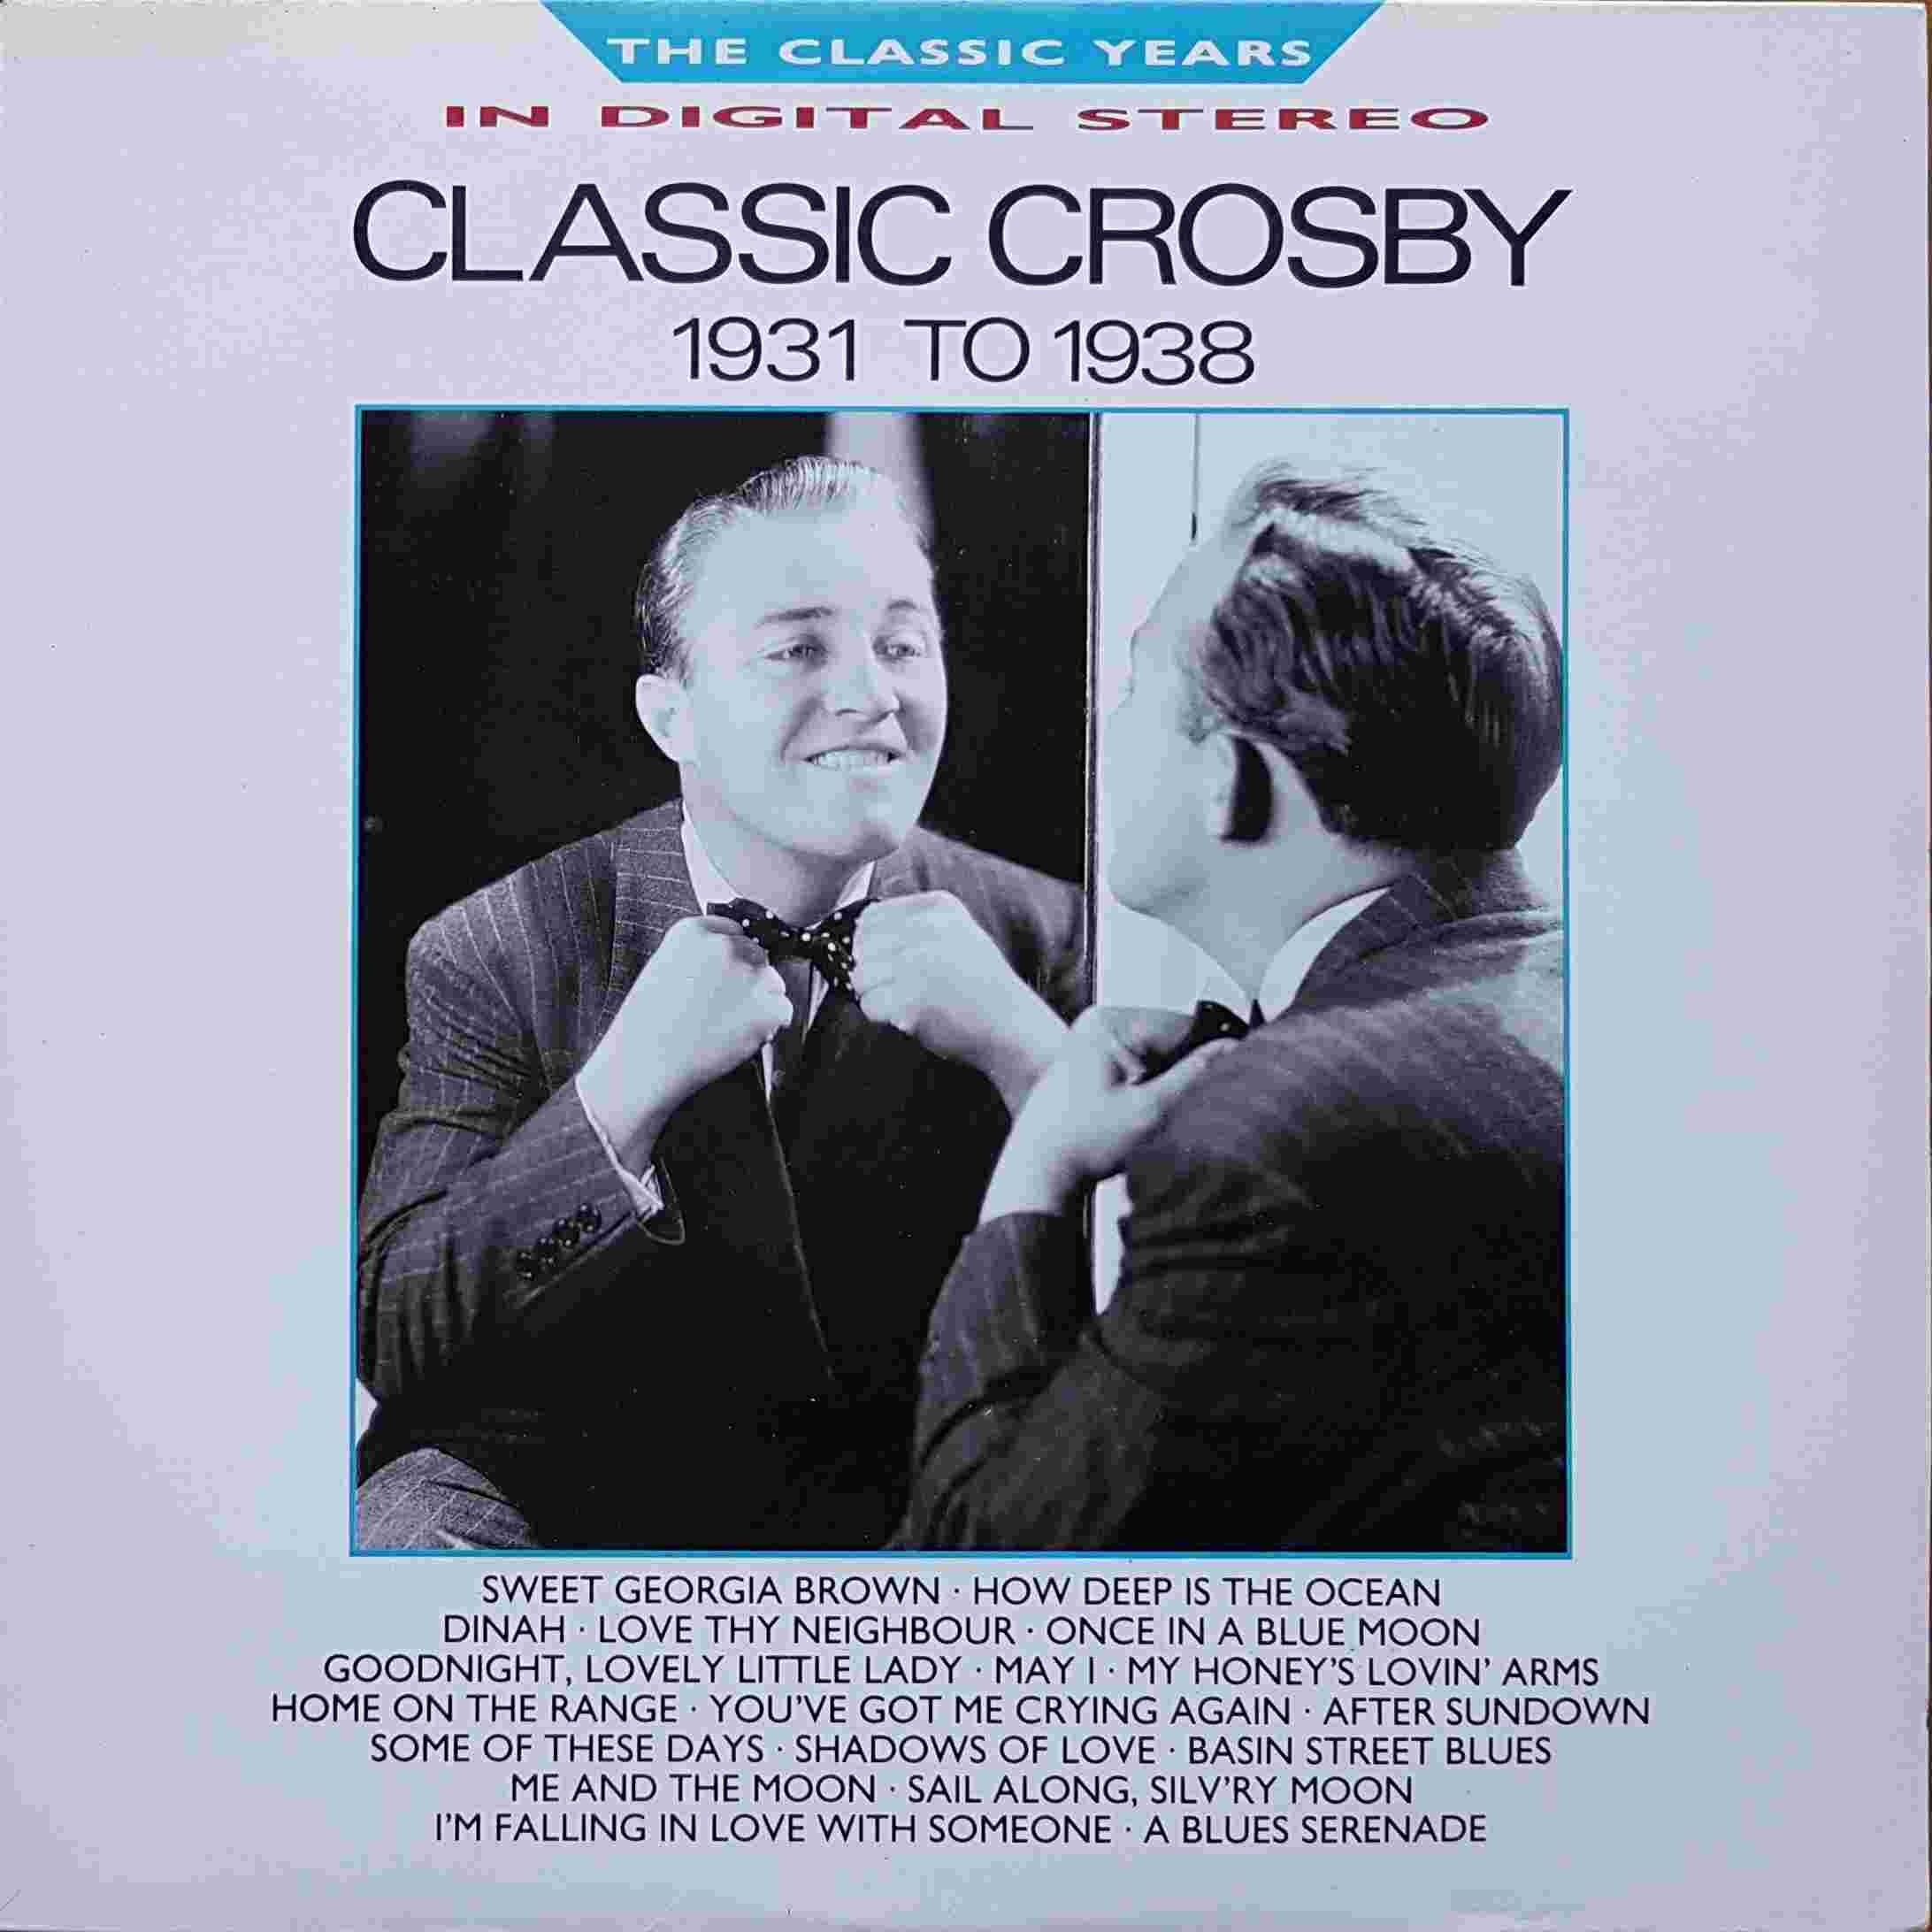 Picture of REB 766 Classic years - Classic Crosby 1931 - 1938 by artist Bing Crosby  from the BBC albums - Records and Tapes library